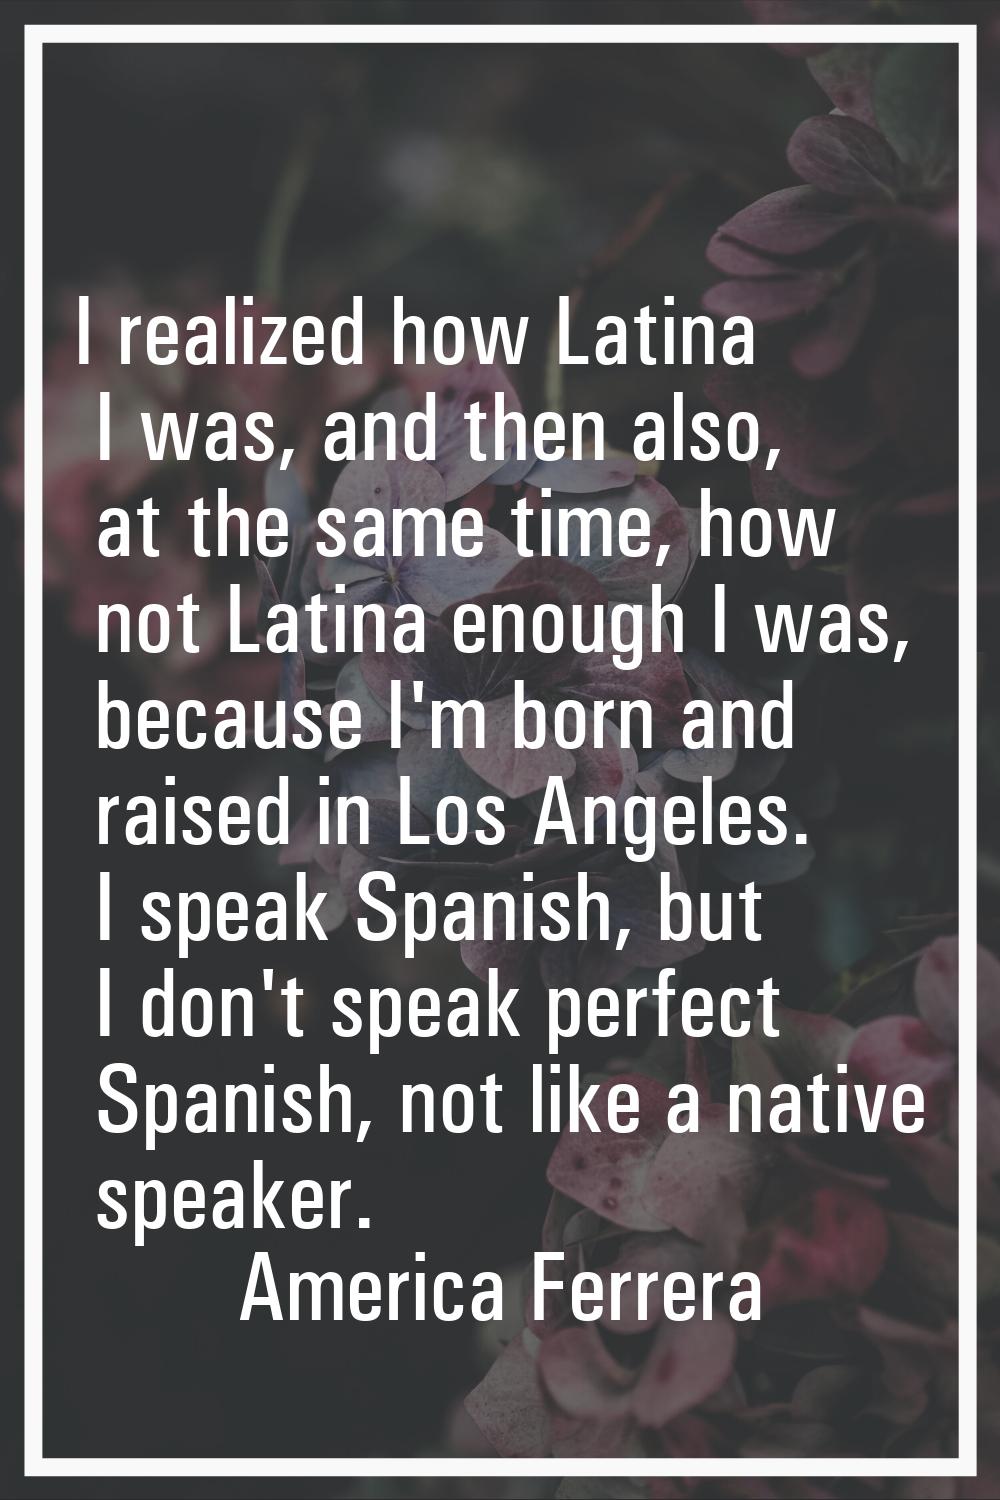 I realized how Latina I was, and then also, at the same time, how not Latina enough I was, because 